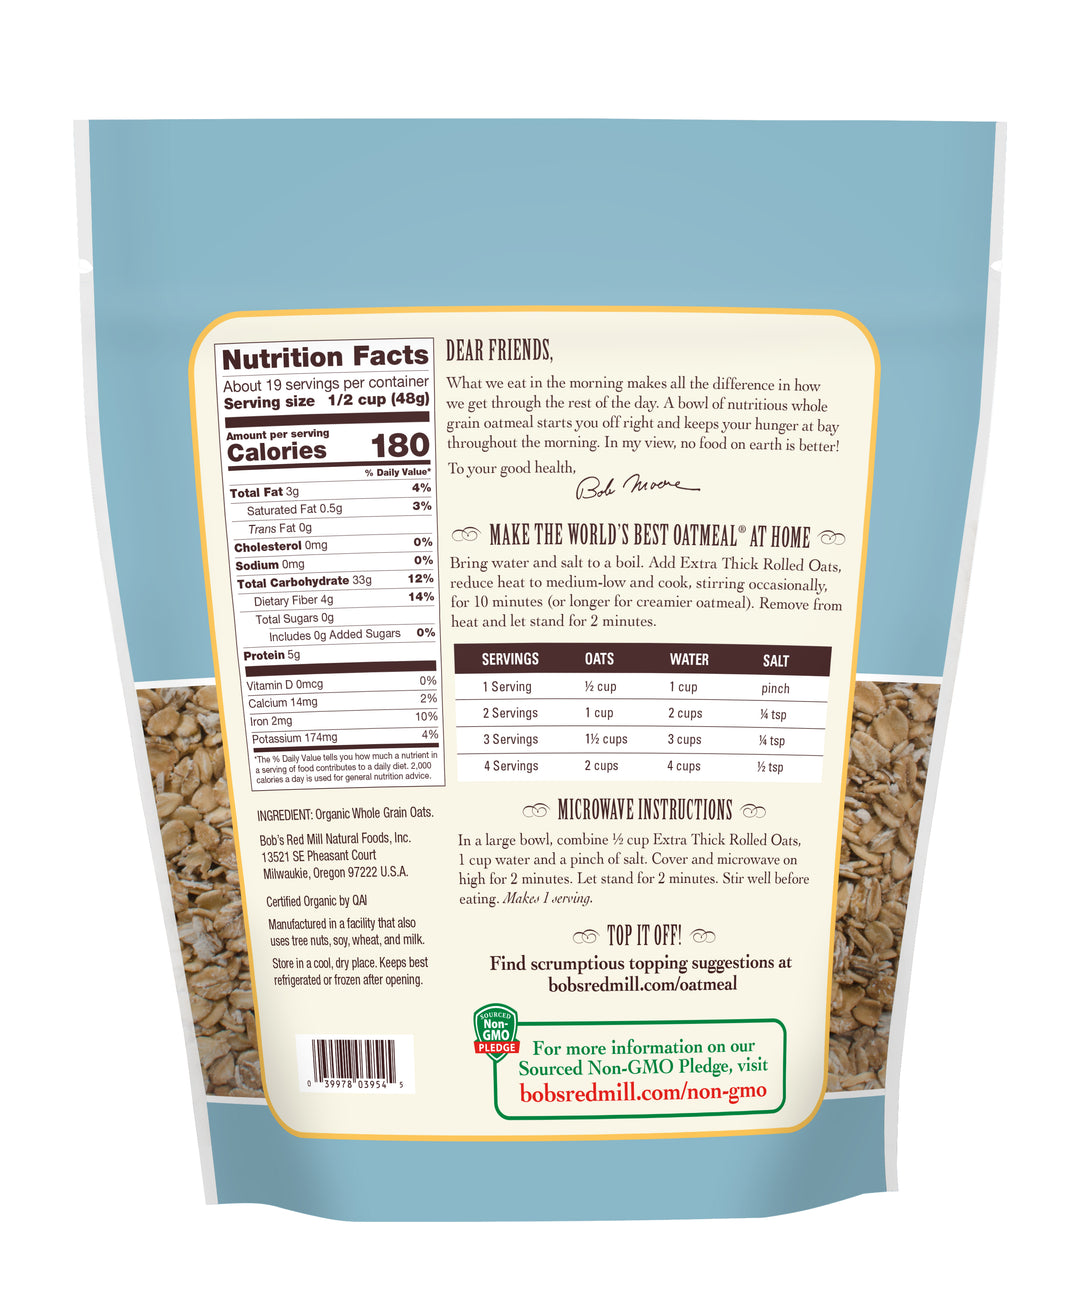 Bobs Red Mill Natural Foods Inc Organic Extra Thick Rolled Oats-32 oz.-4/Case